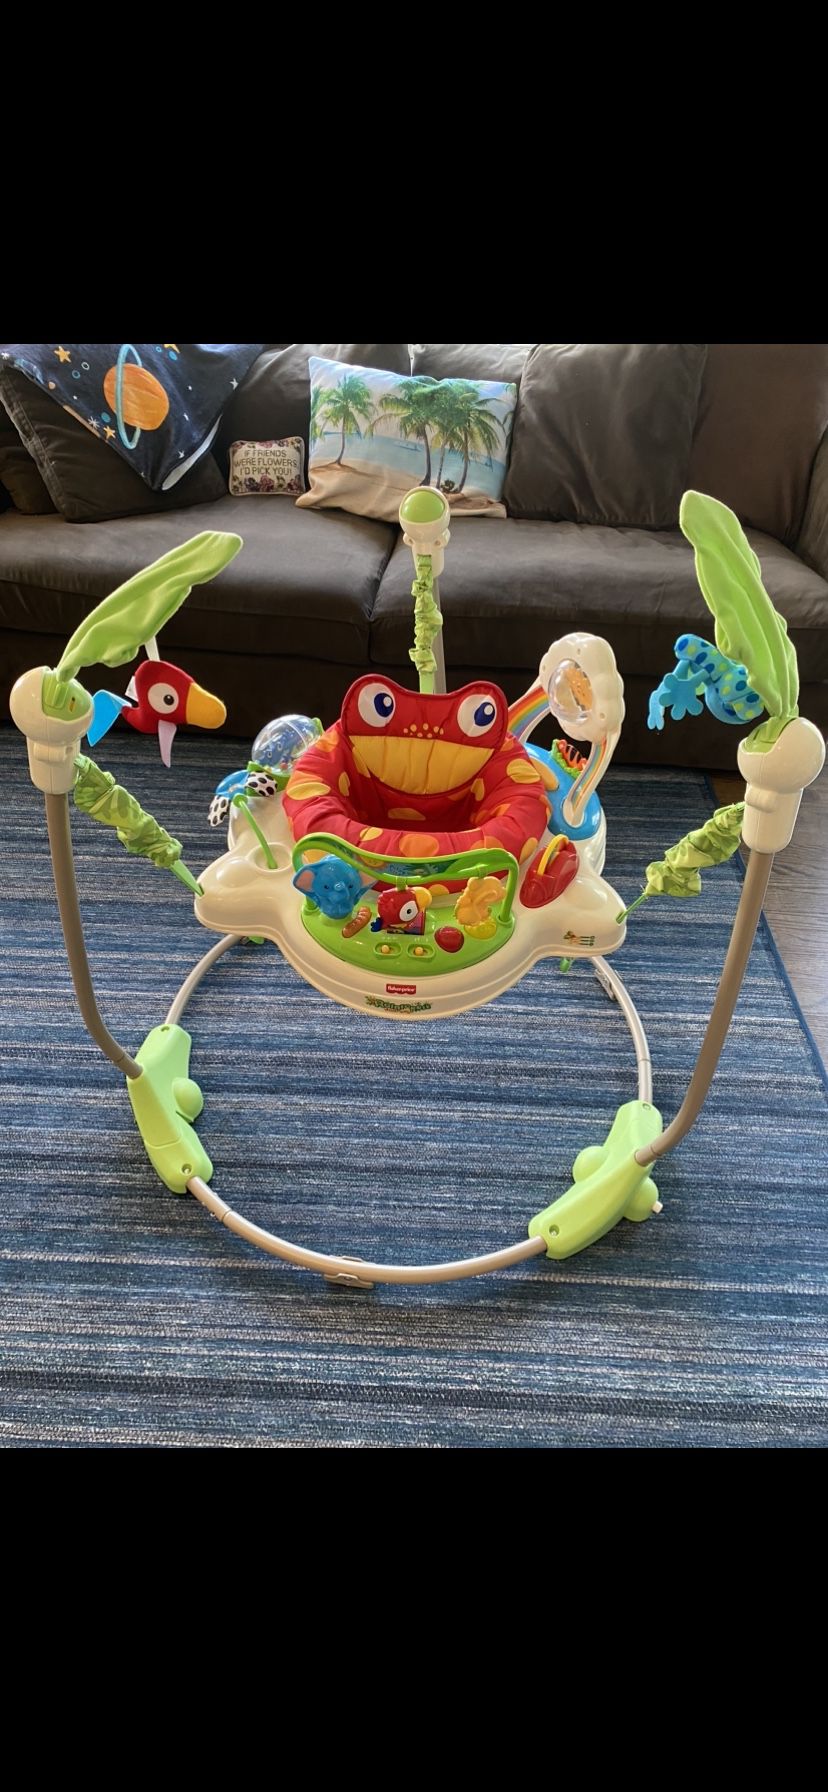 Fisher-Price Baby Bouncer Rainforest Jumperoo Activity Center with Music Lights Sounds and Developmental Toys